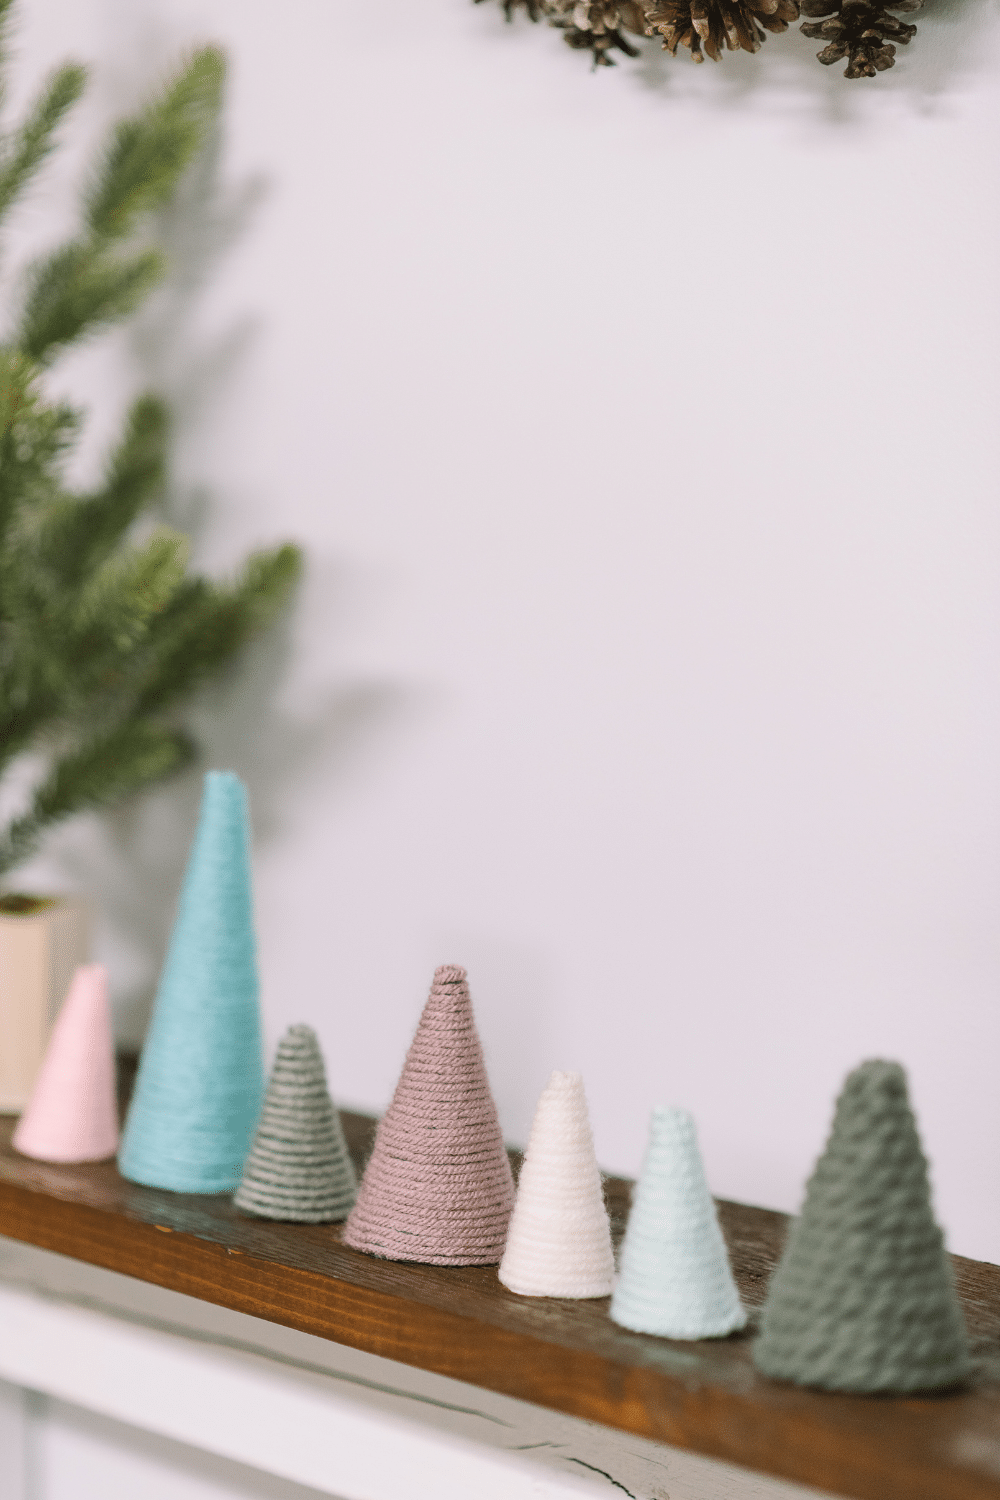 How to Make Mini Christmas Trees with Paper Cones and Yarn